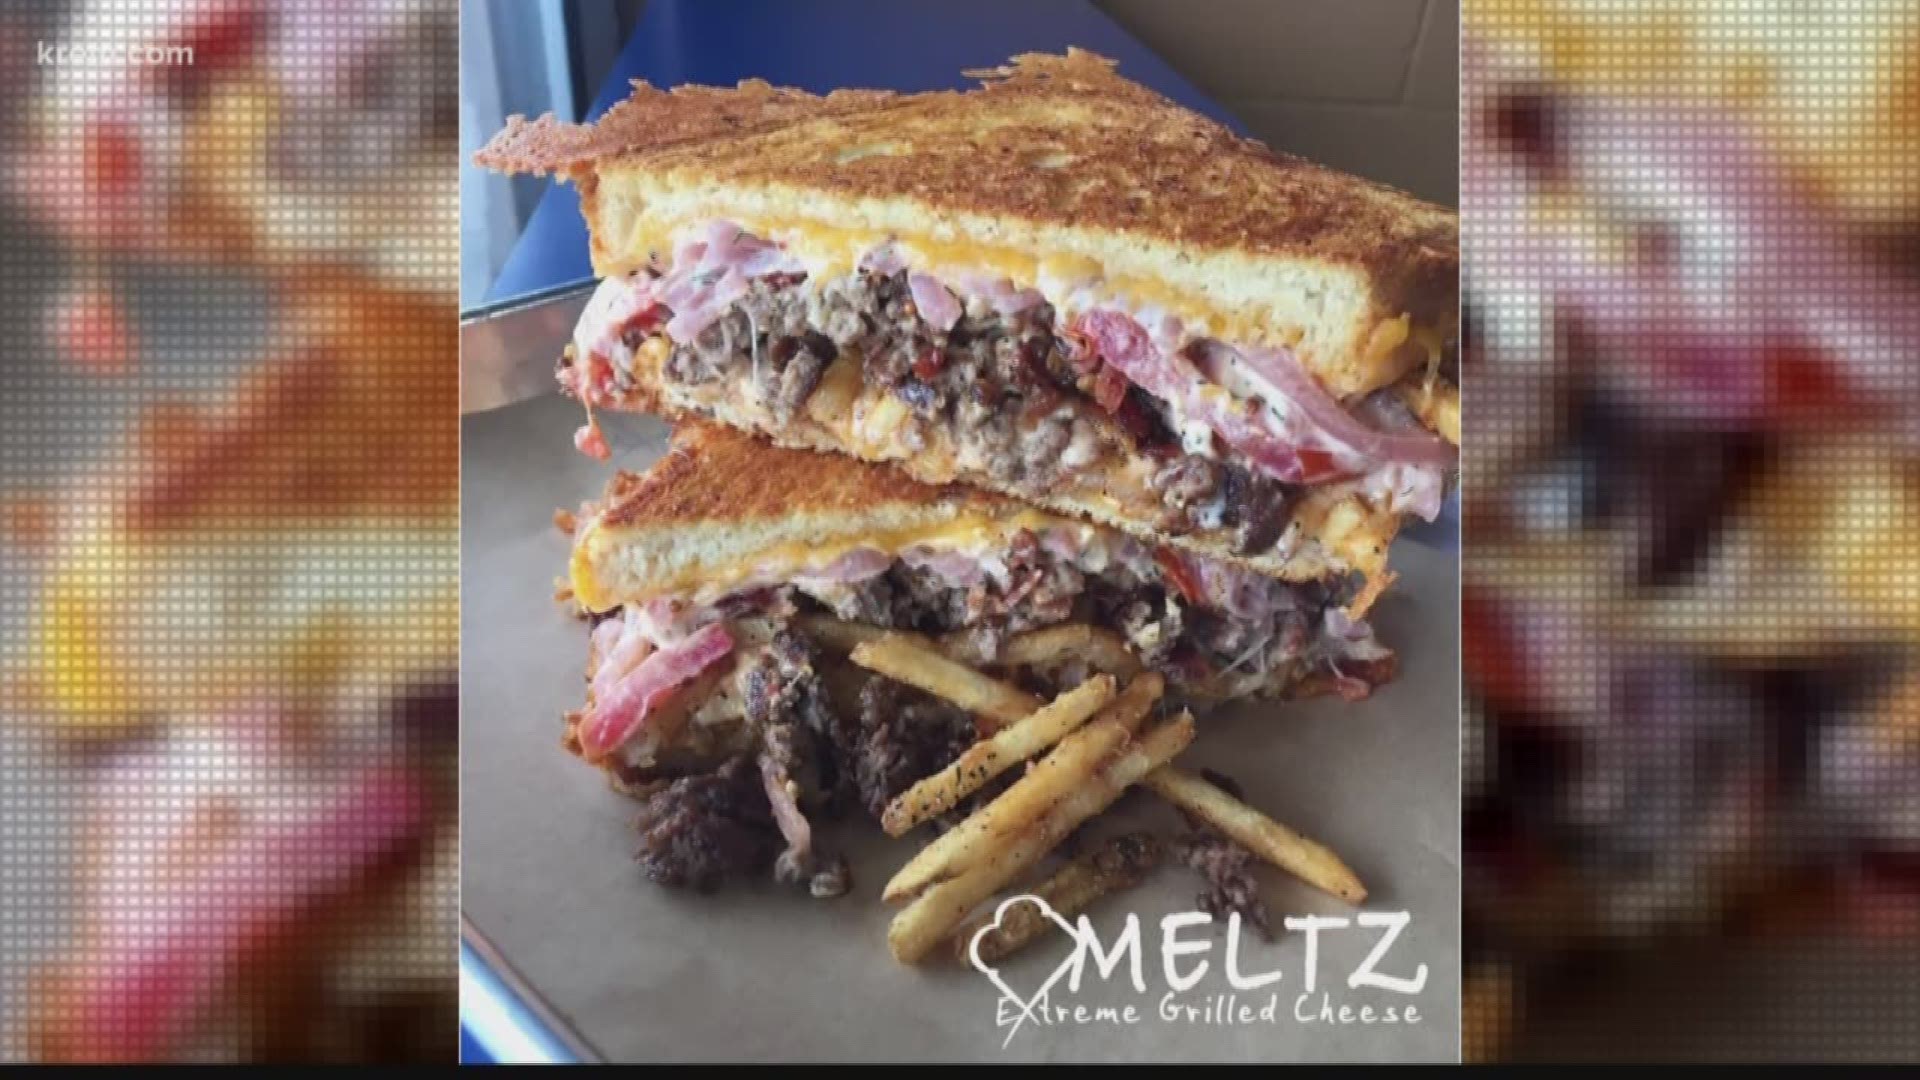 April 12 is National Grilled Cheese Day! The KREM 2 Morning News crew is celebrating with delicious sandwiches from Meltz Extreme Grilled Cheese. Grab some tomato soup and dig in!